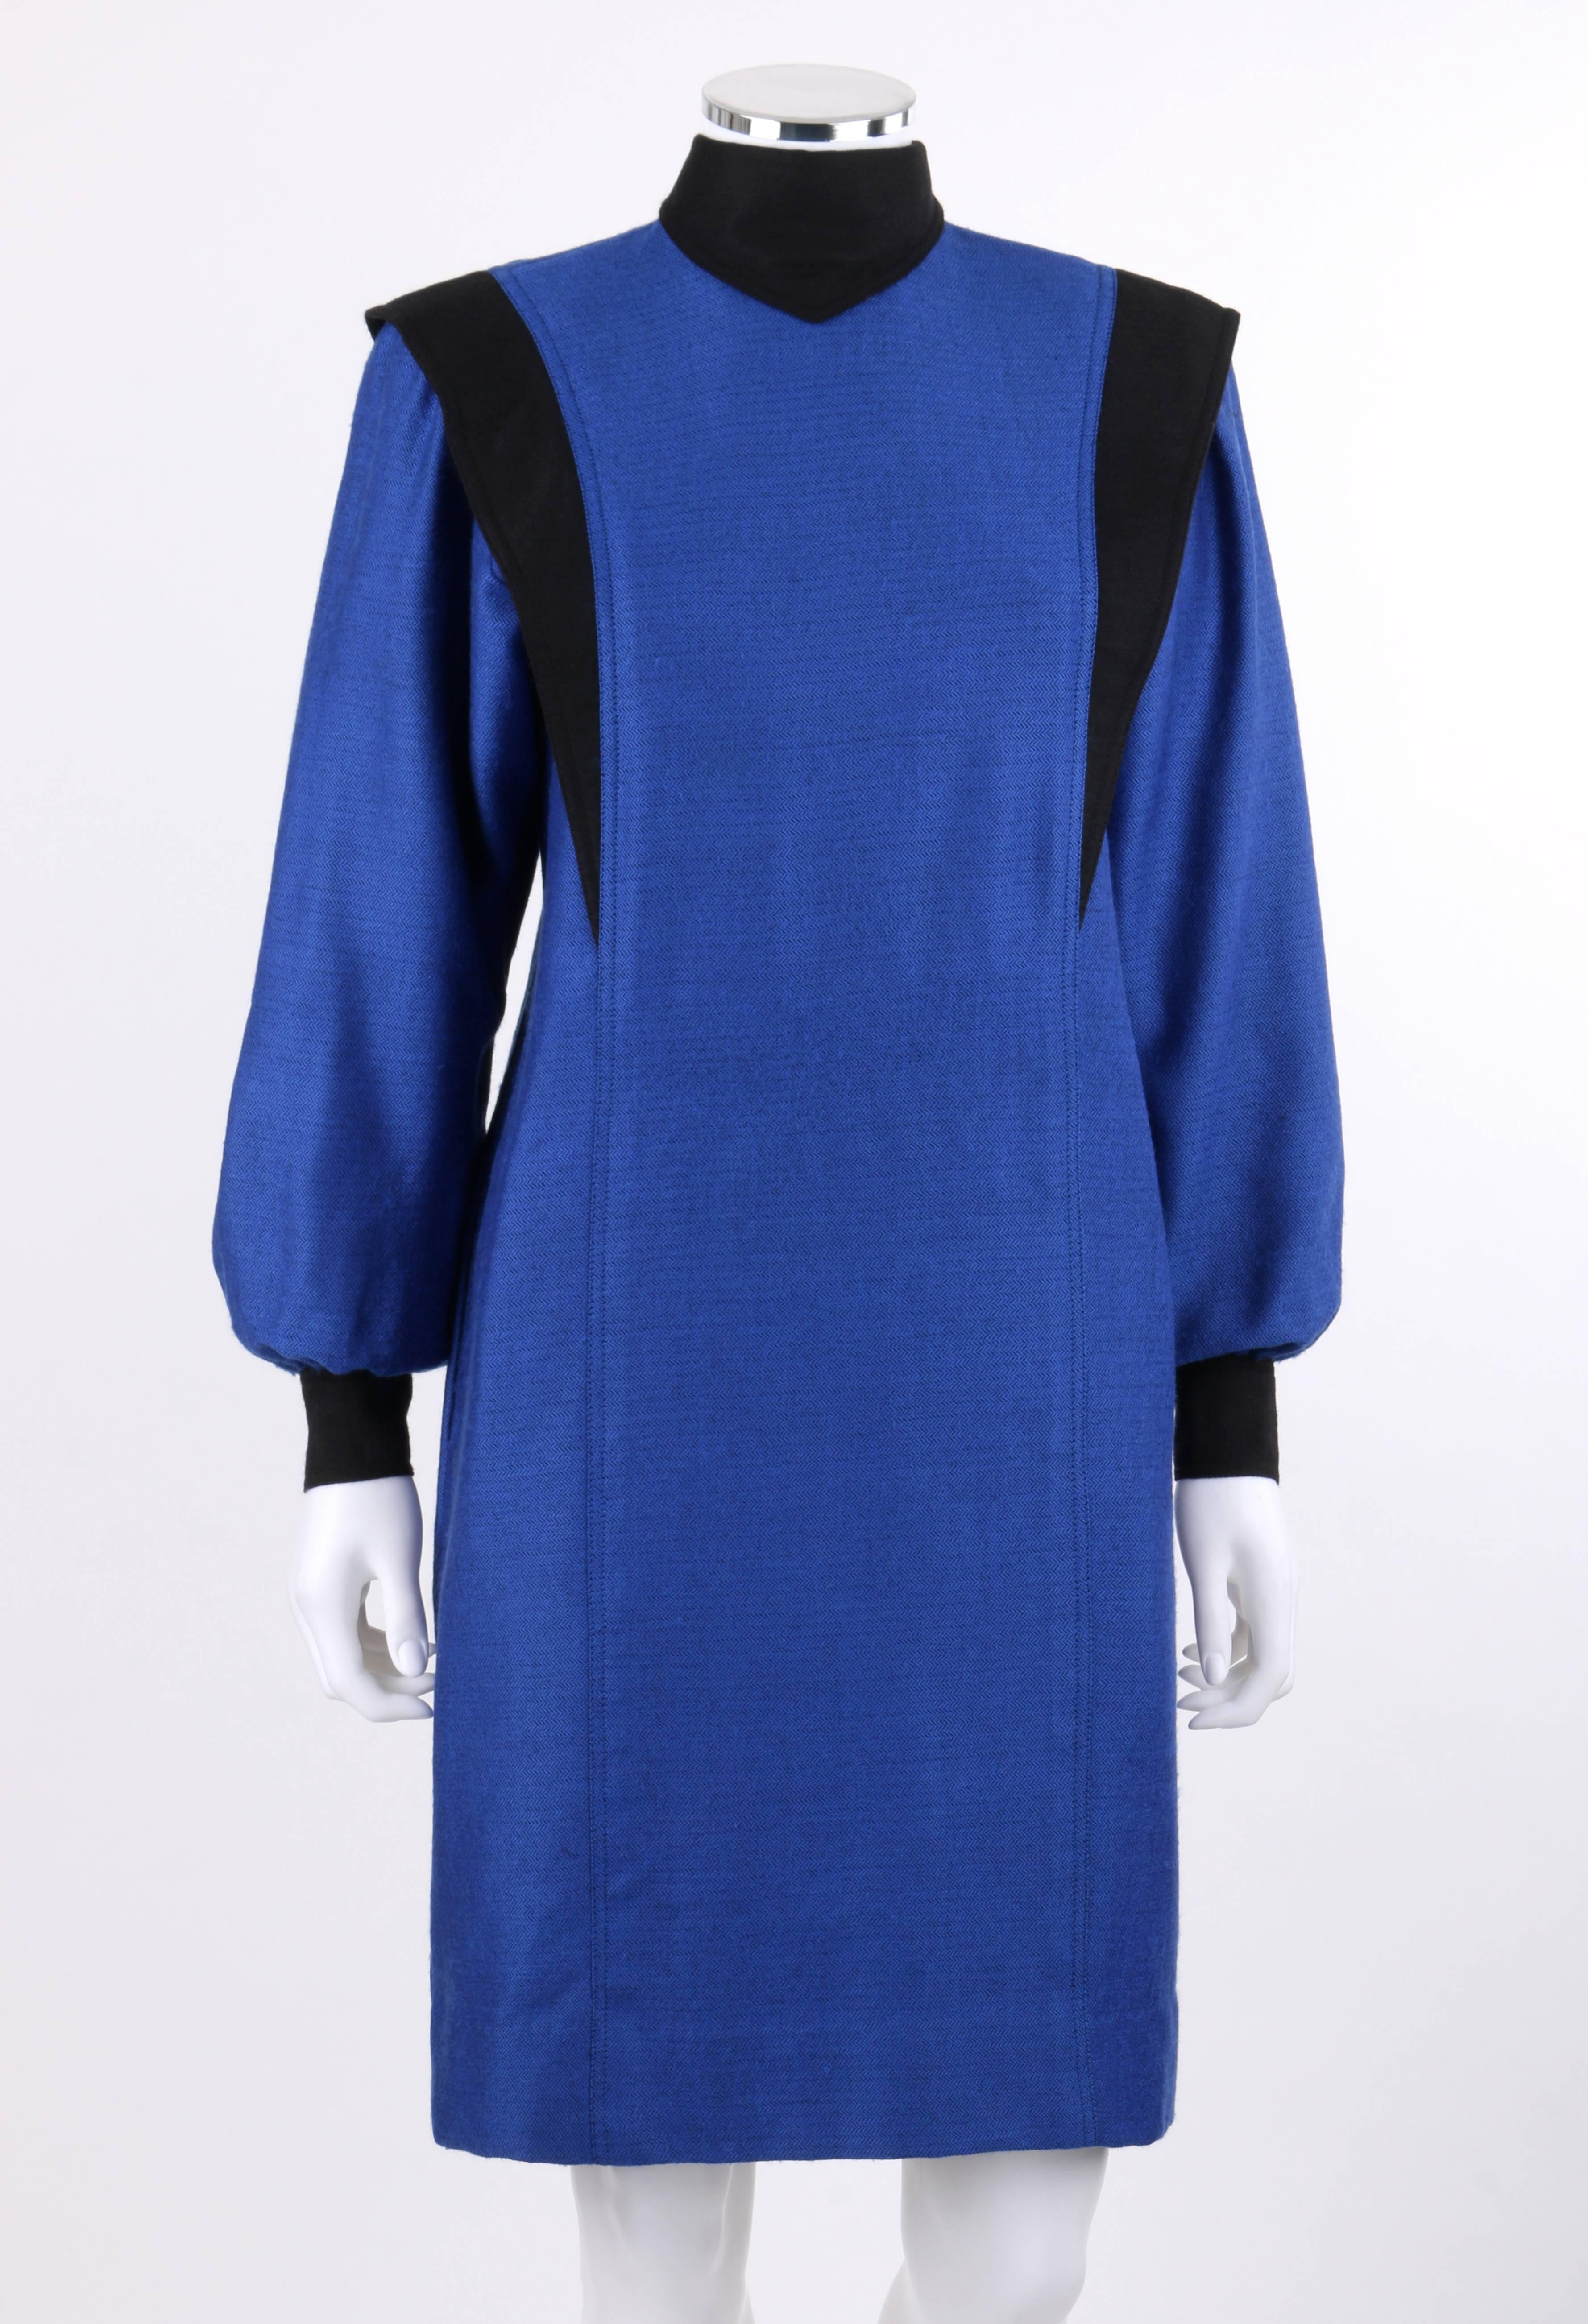 Vintage Balenciaga c.1980's blue and black wool herringbone bishop sleeve shift dress. Black mandarin collar with pointed center front fold. Long bishop sleeves with two button closures at contrasting black cuffs. Two contrasting black herringbone